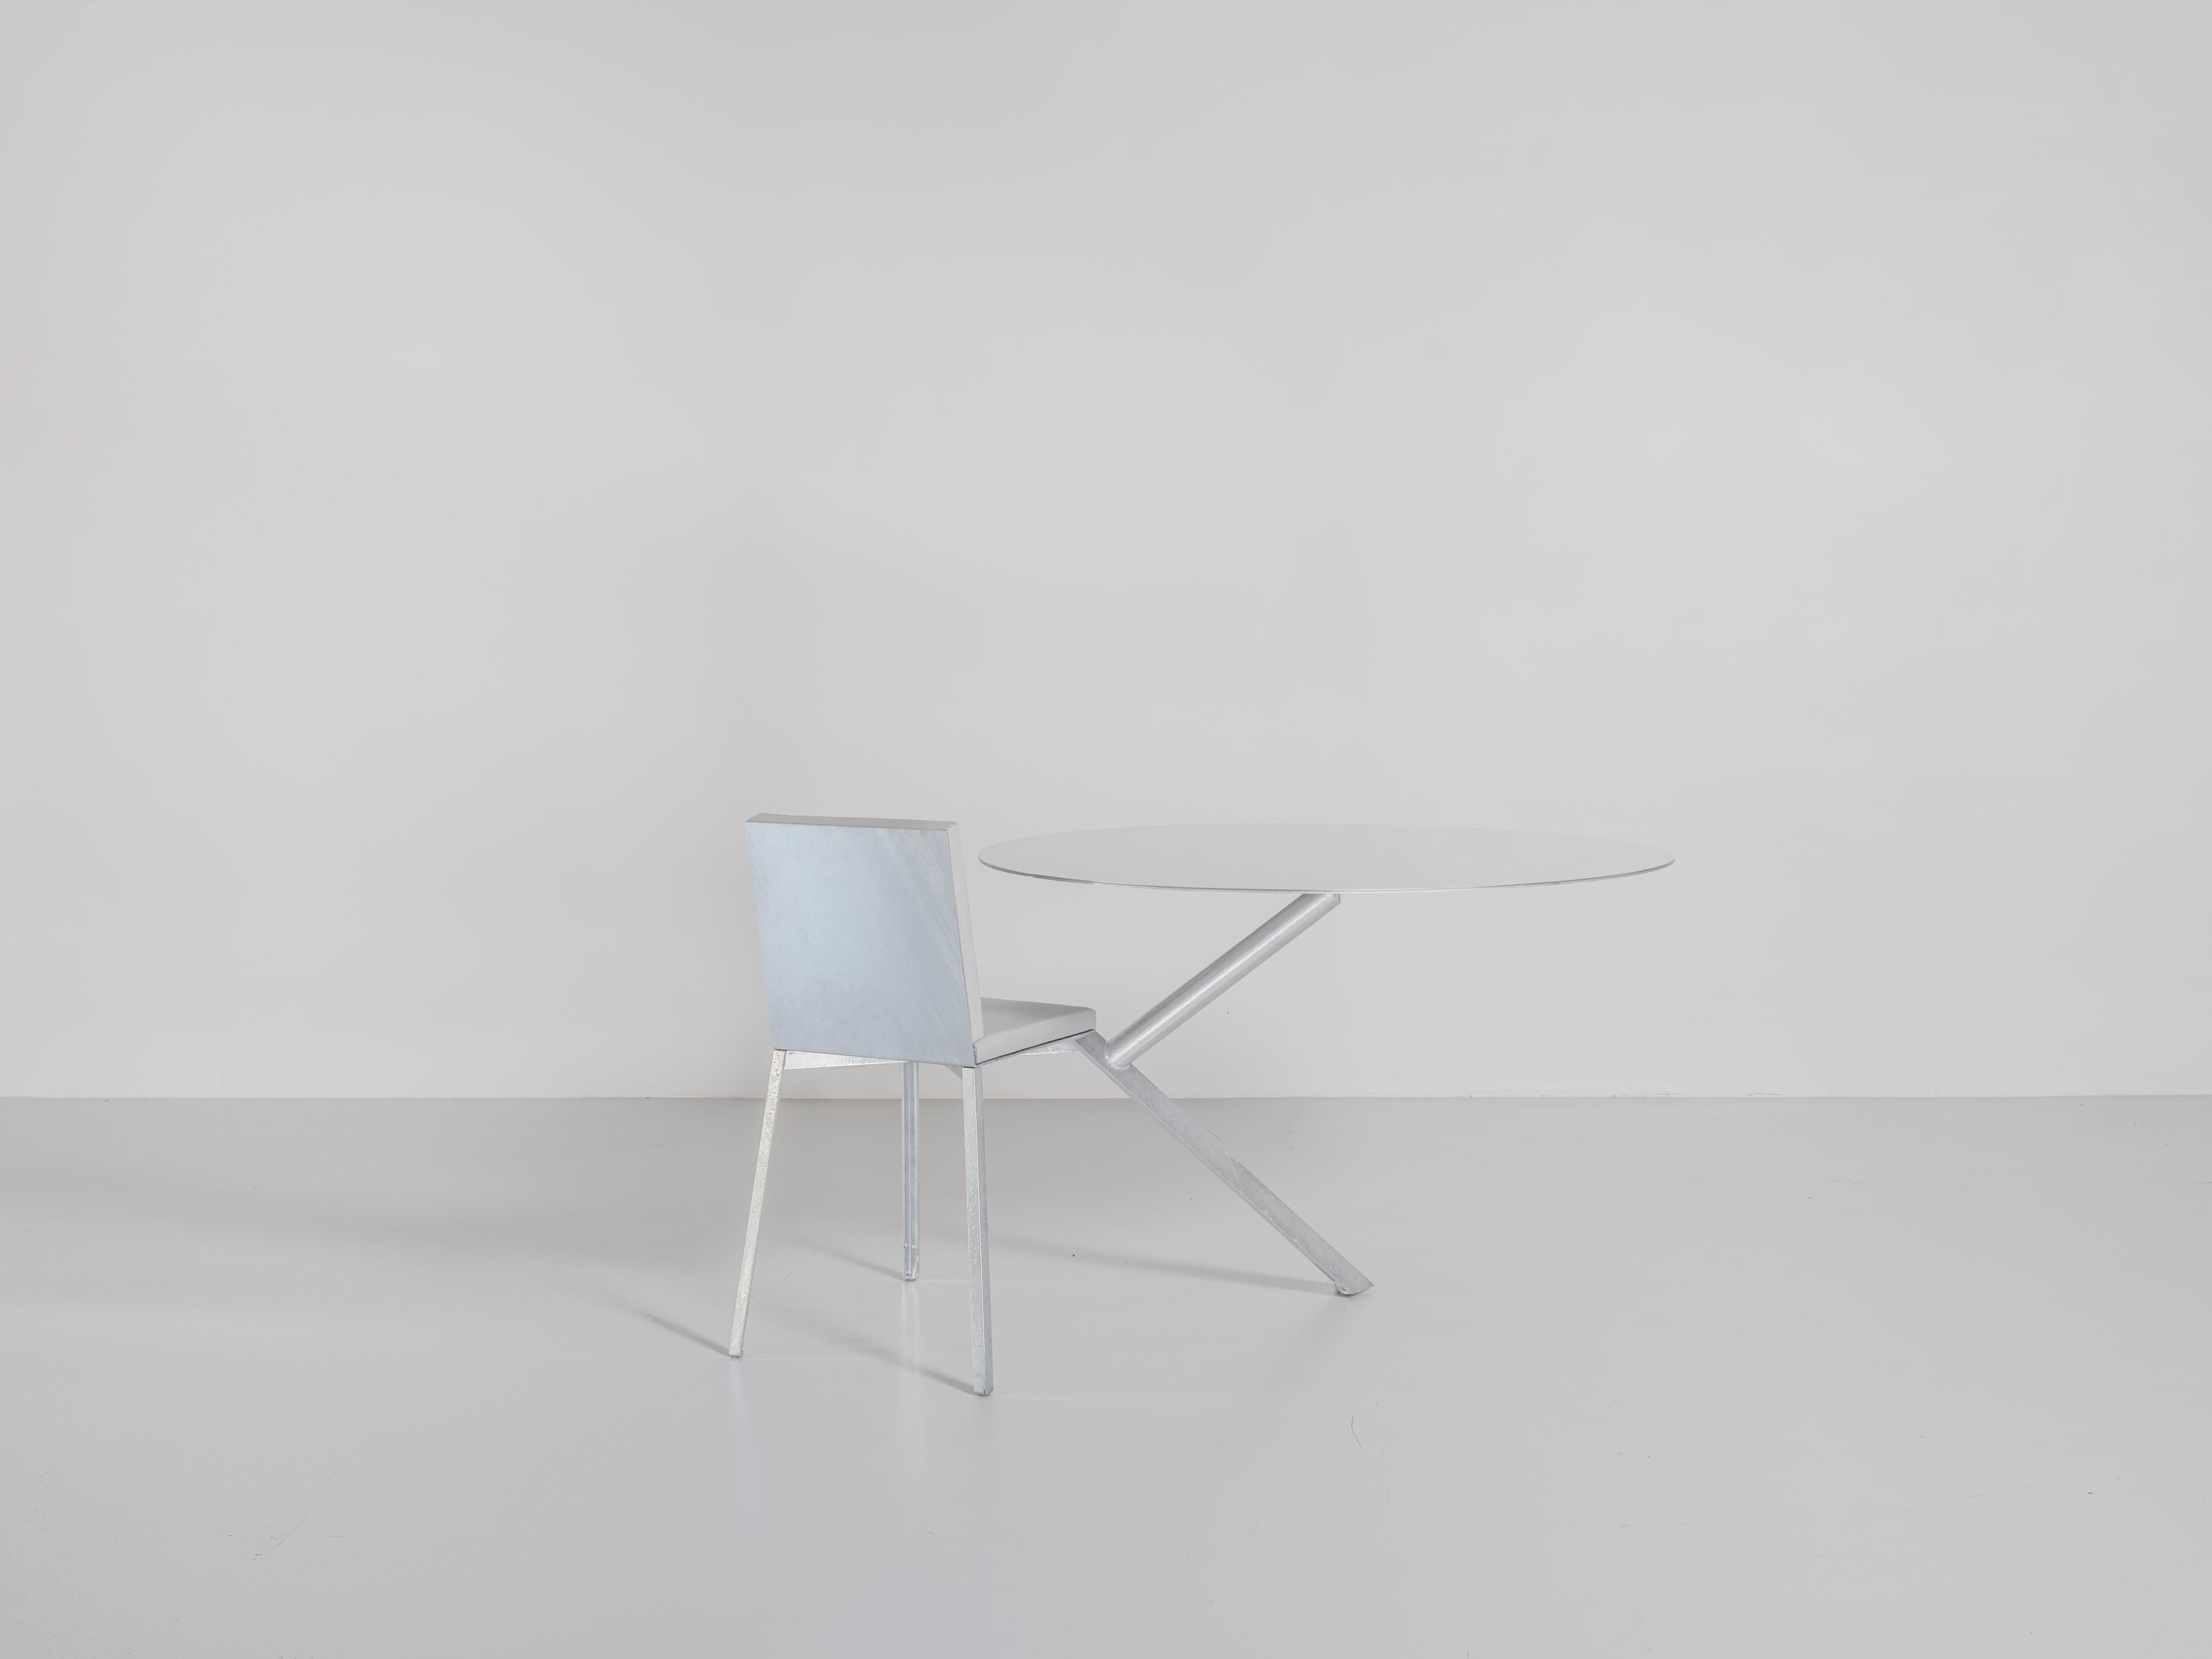 Sam Chermayeff
Chair with table attached
From the series “Beasts”
Produced in exclusive for Side Gallery
Manufactured by ERTL und ZULL
Berlin, 2021
Galvanized steel, mirror, upholstery
Contemporary Design

Measurements
118 cm x 135,5 cm x